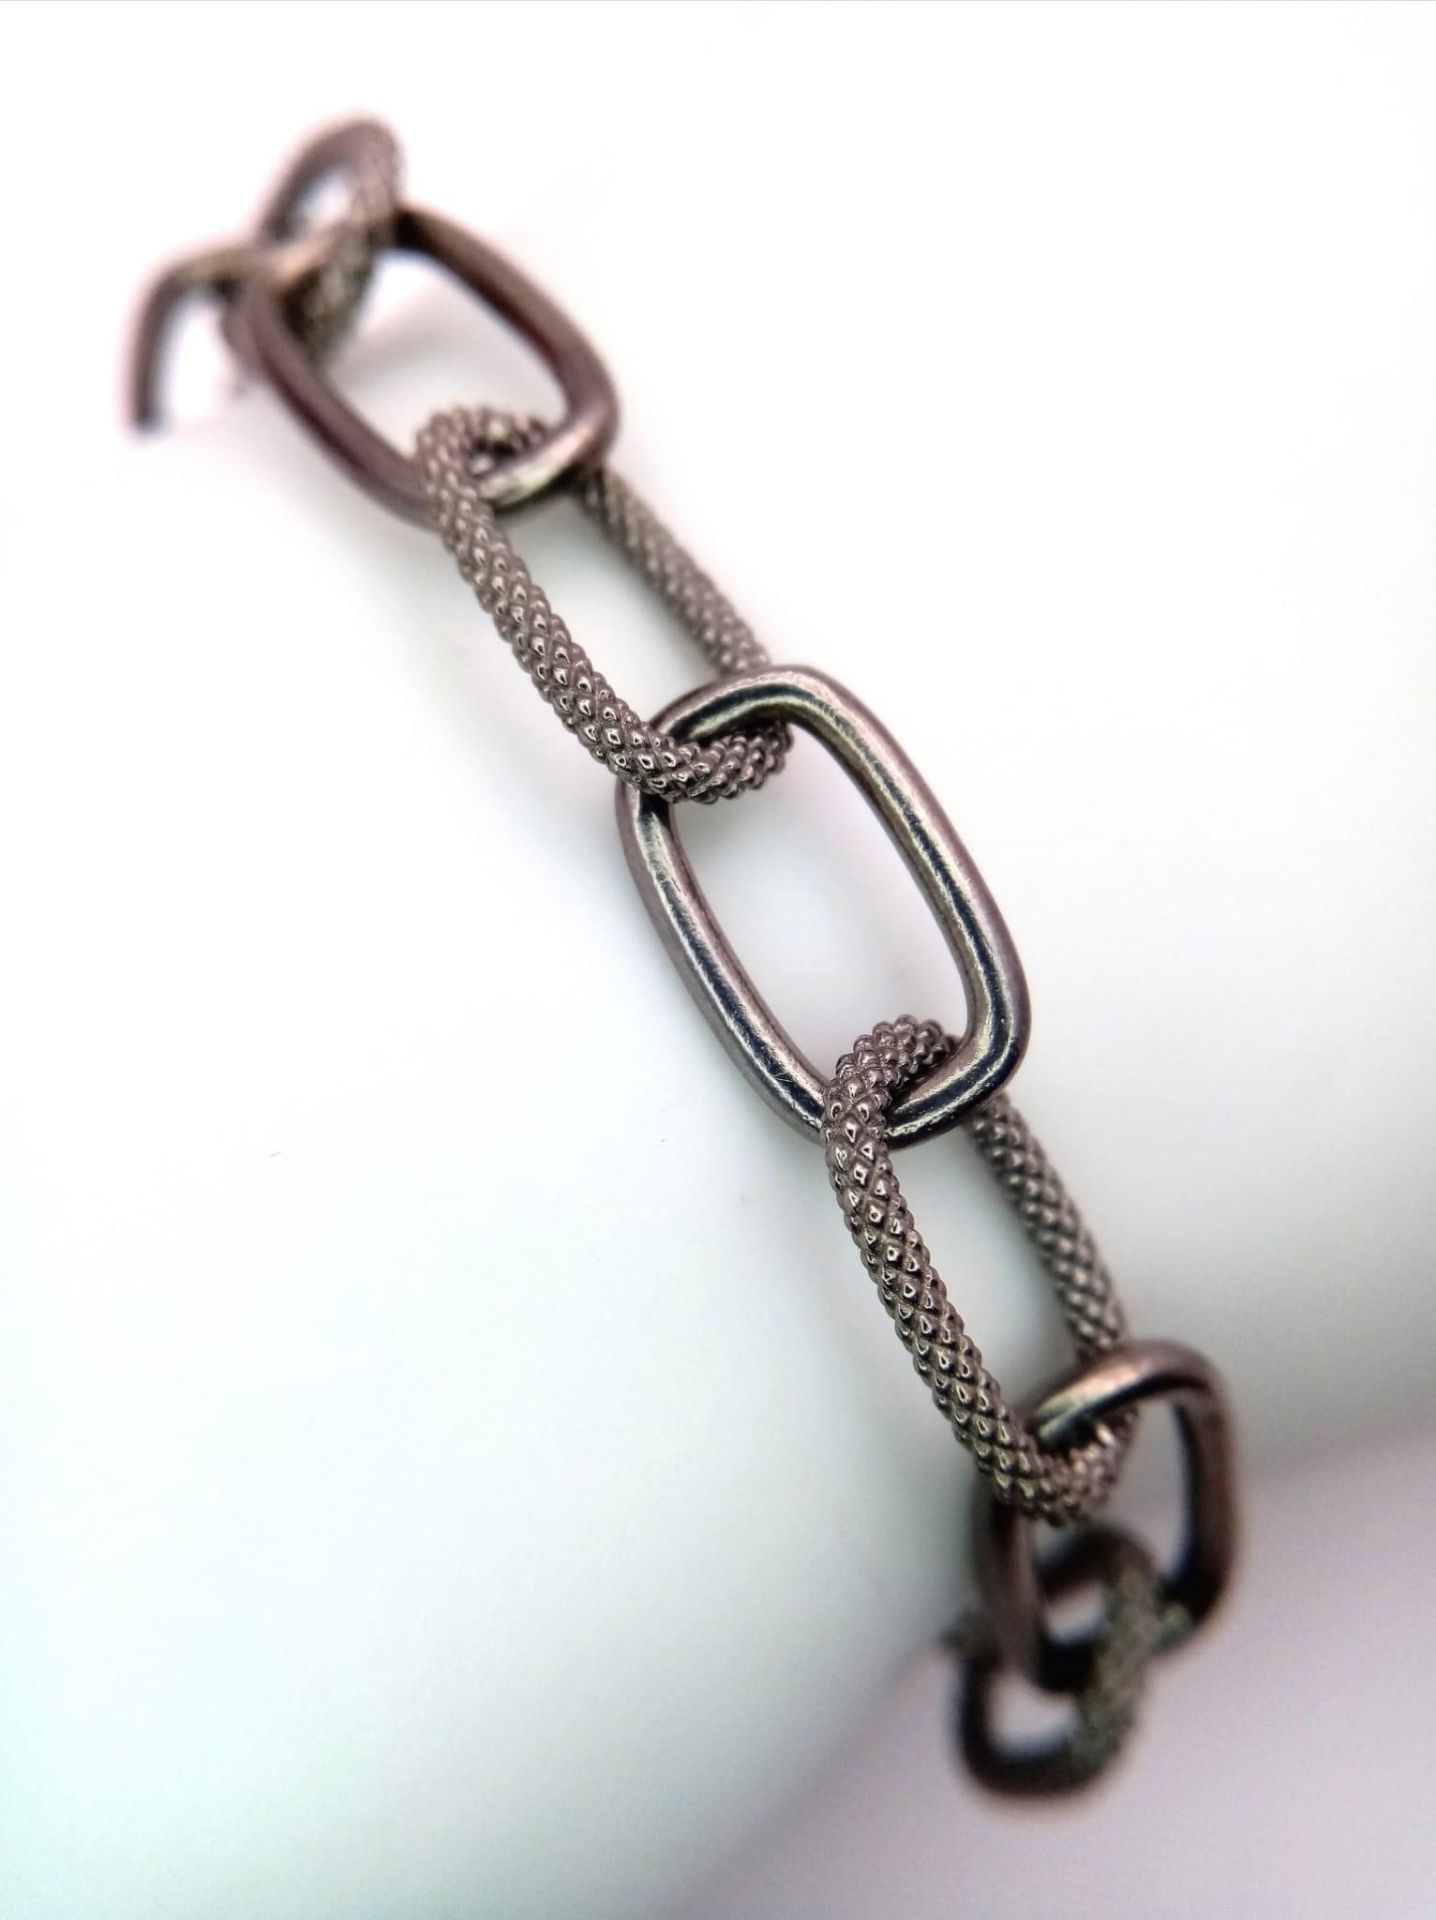 A 925 Silver Elongated Link Bracelet. Weight - 13.5 gm. 18cm. Comes with a presentation case. Ref: - Image 2 of 4